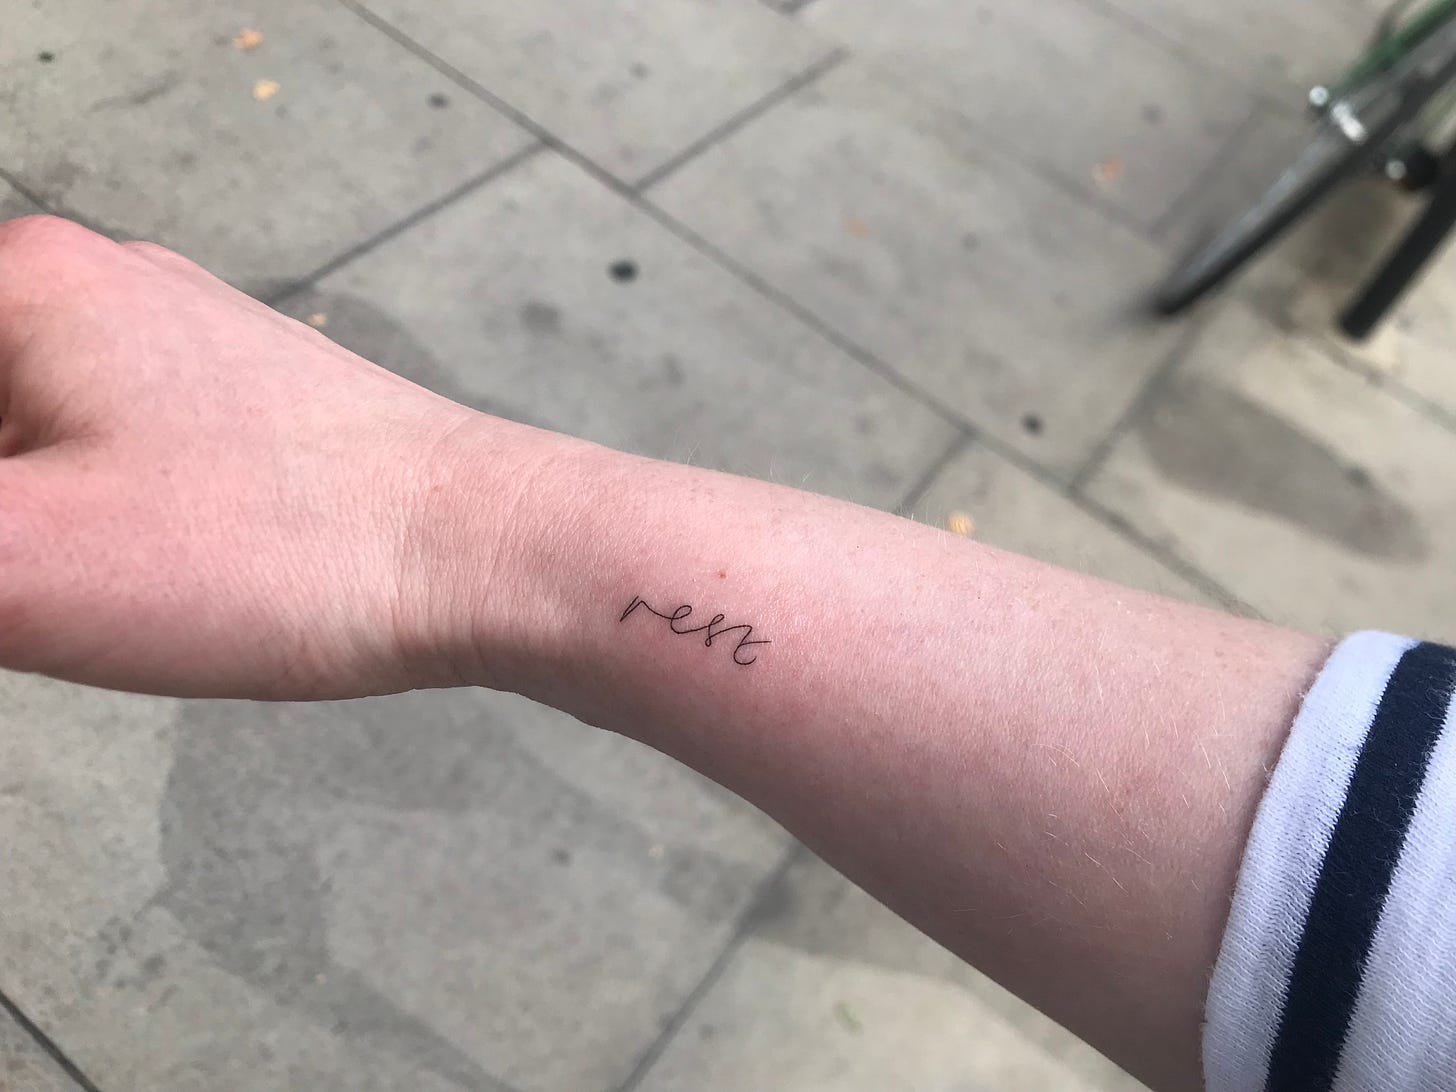 tattoo of "rest" in cursive script on a white woman's forearm, with pavement in background